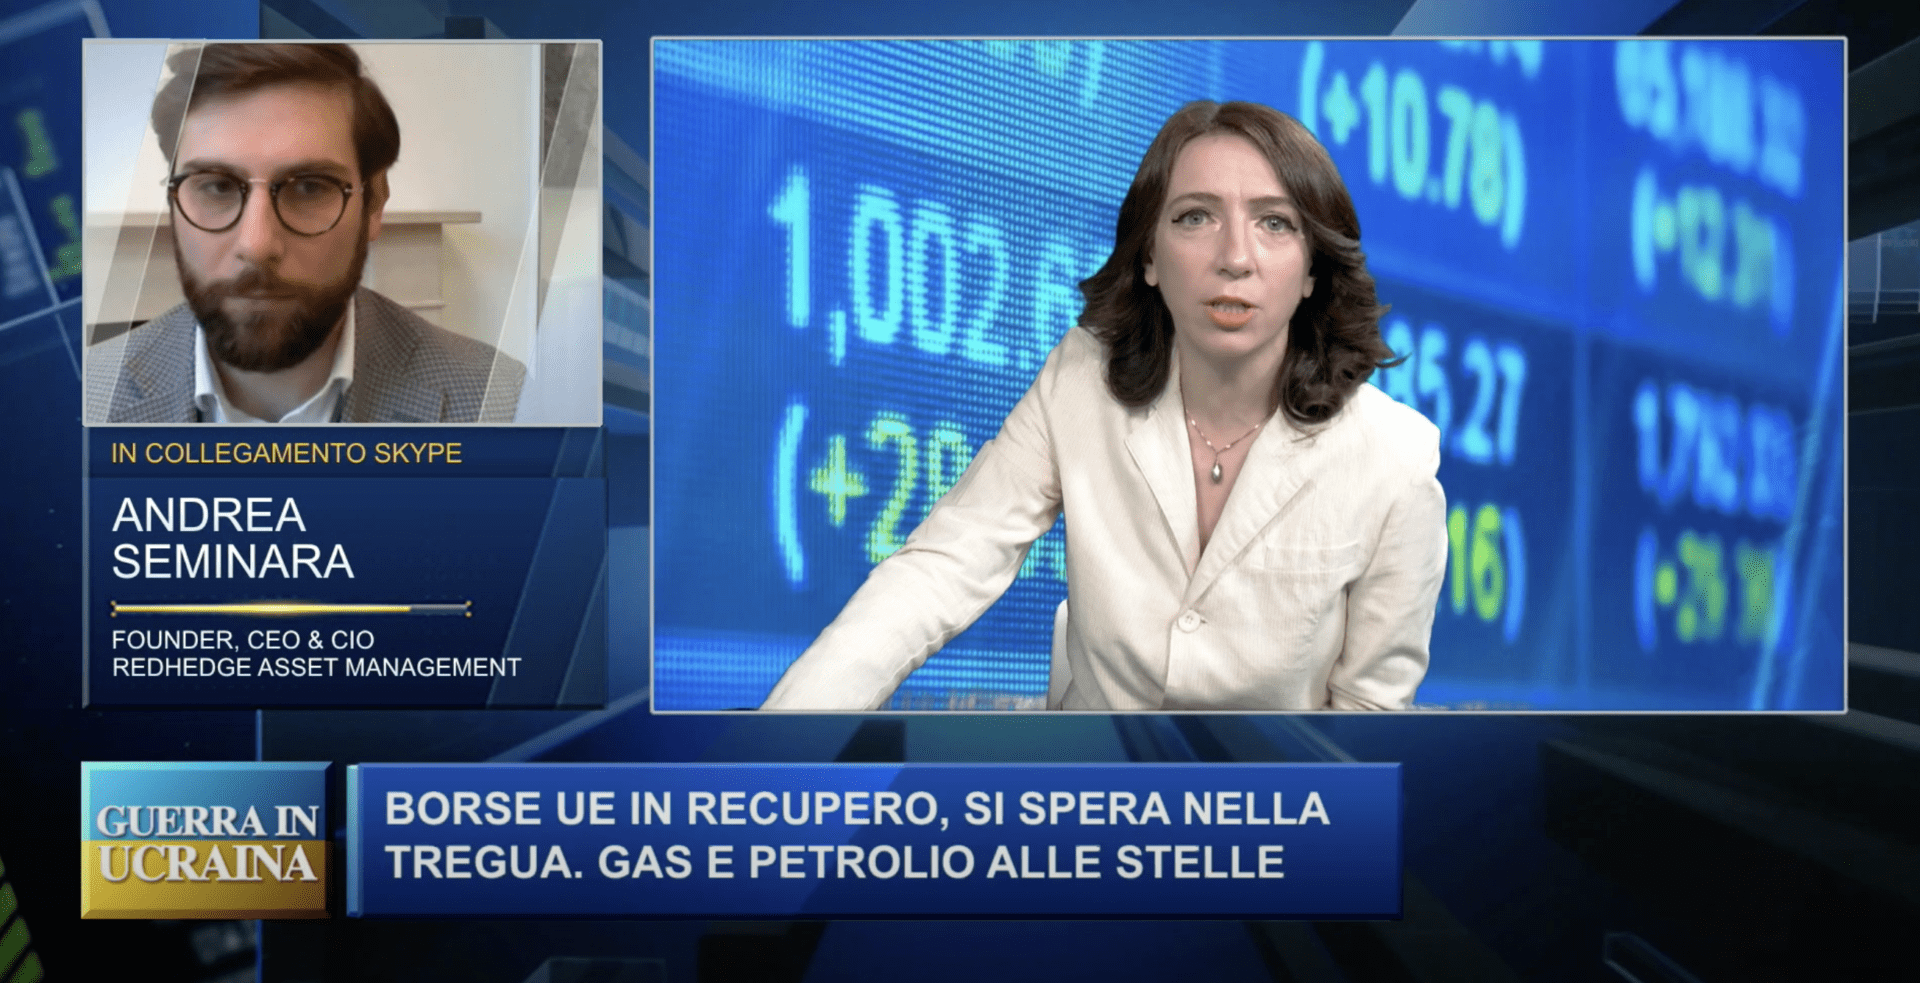 CNBC Italy Live Interview with Redhedge Asset Management CEO, Andrea Seminara (7 March, 2022)